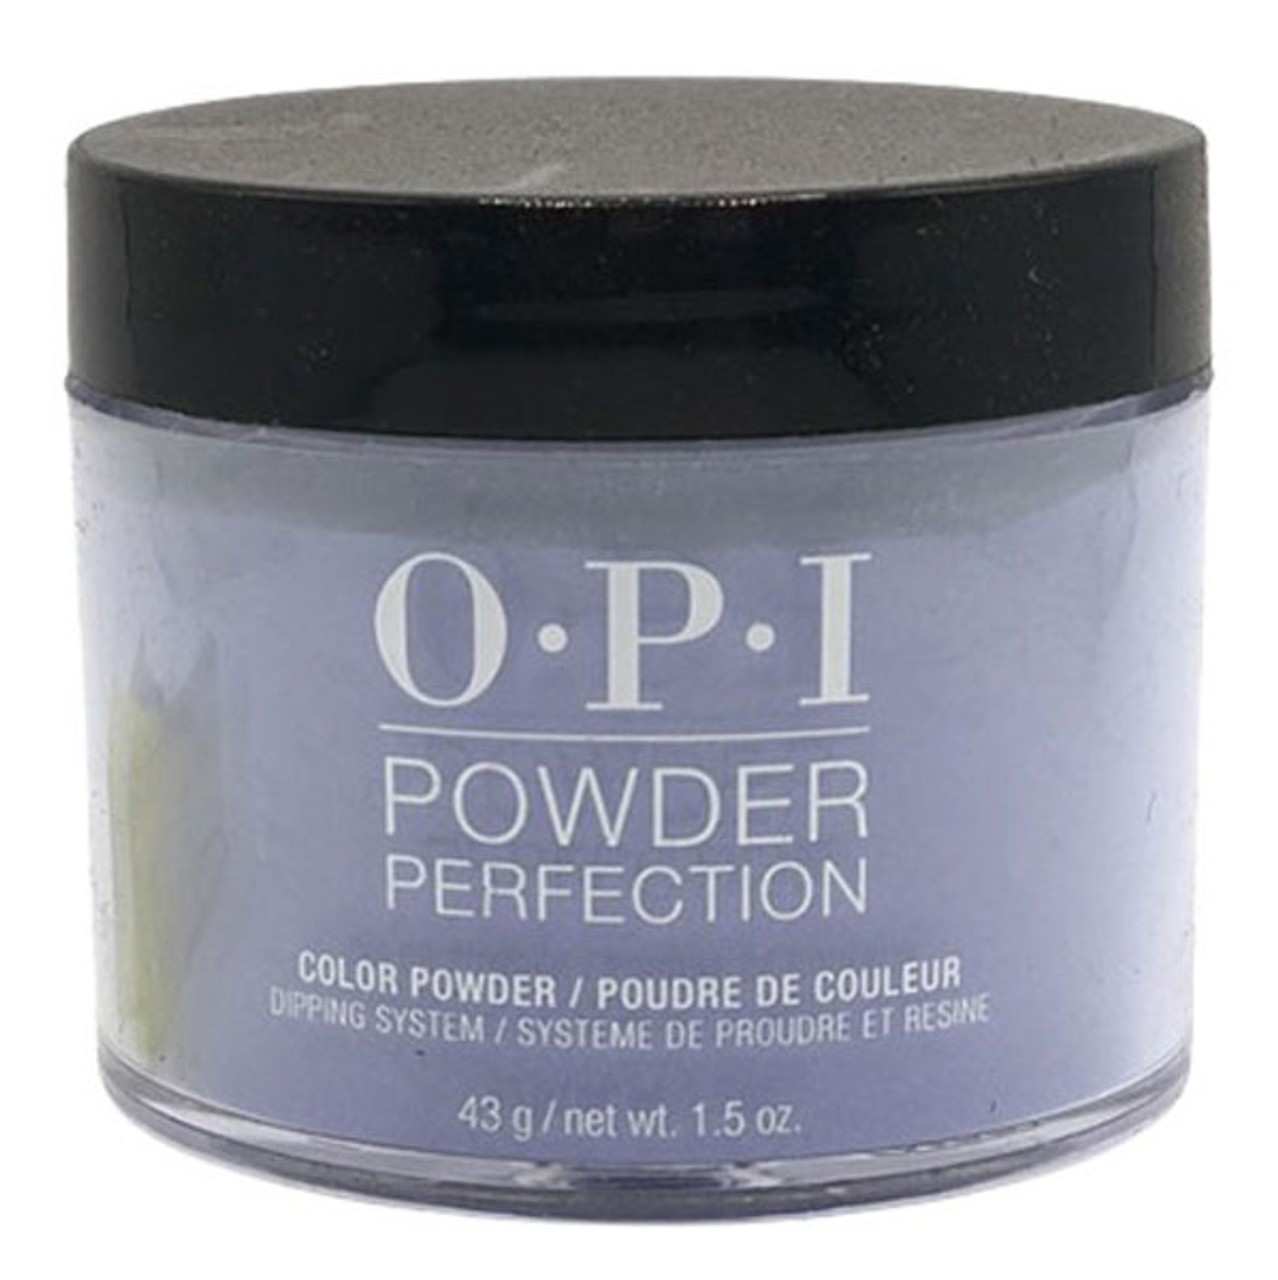 OPI Dipping Powder Perfection Show Us Your Tips! - 1.5 oz / 43 G